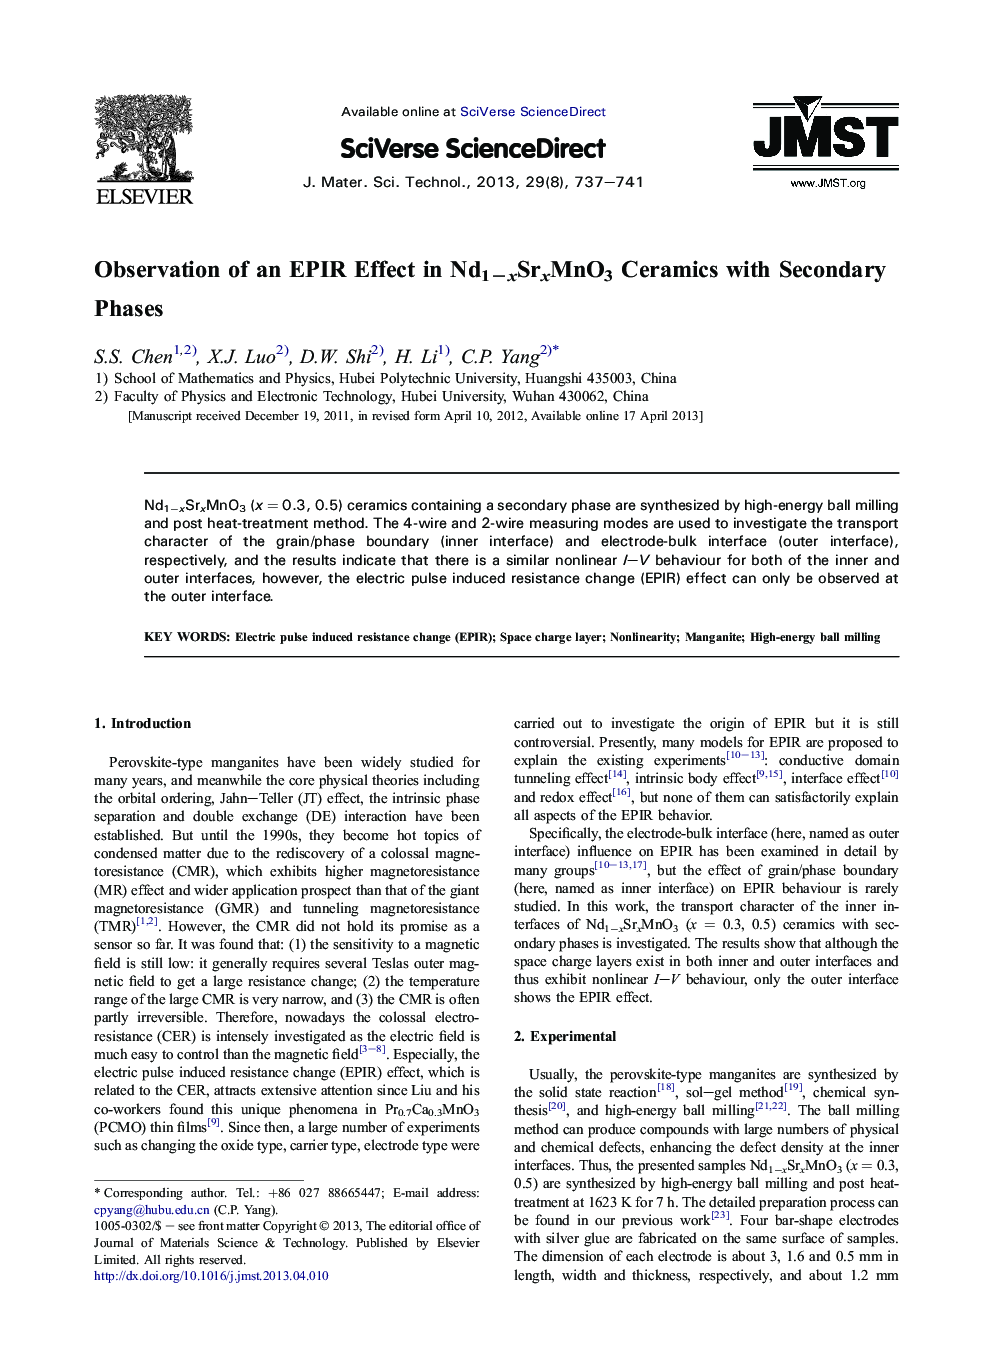 Observation of an EPIR Effect in Nd1−xSrxMnO3 Ceramics with Secondary Phases